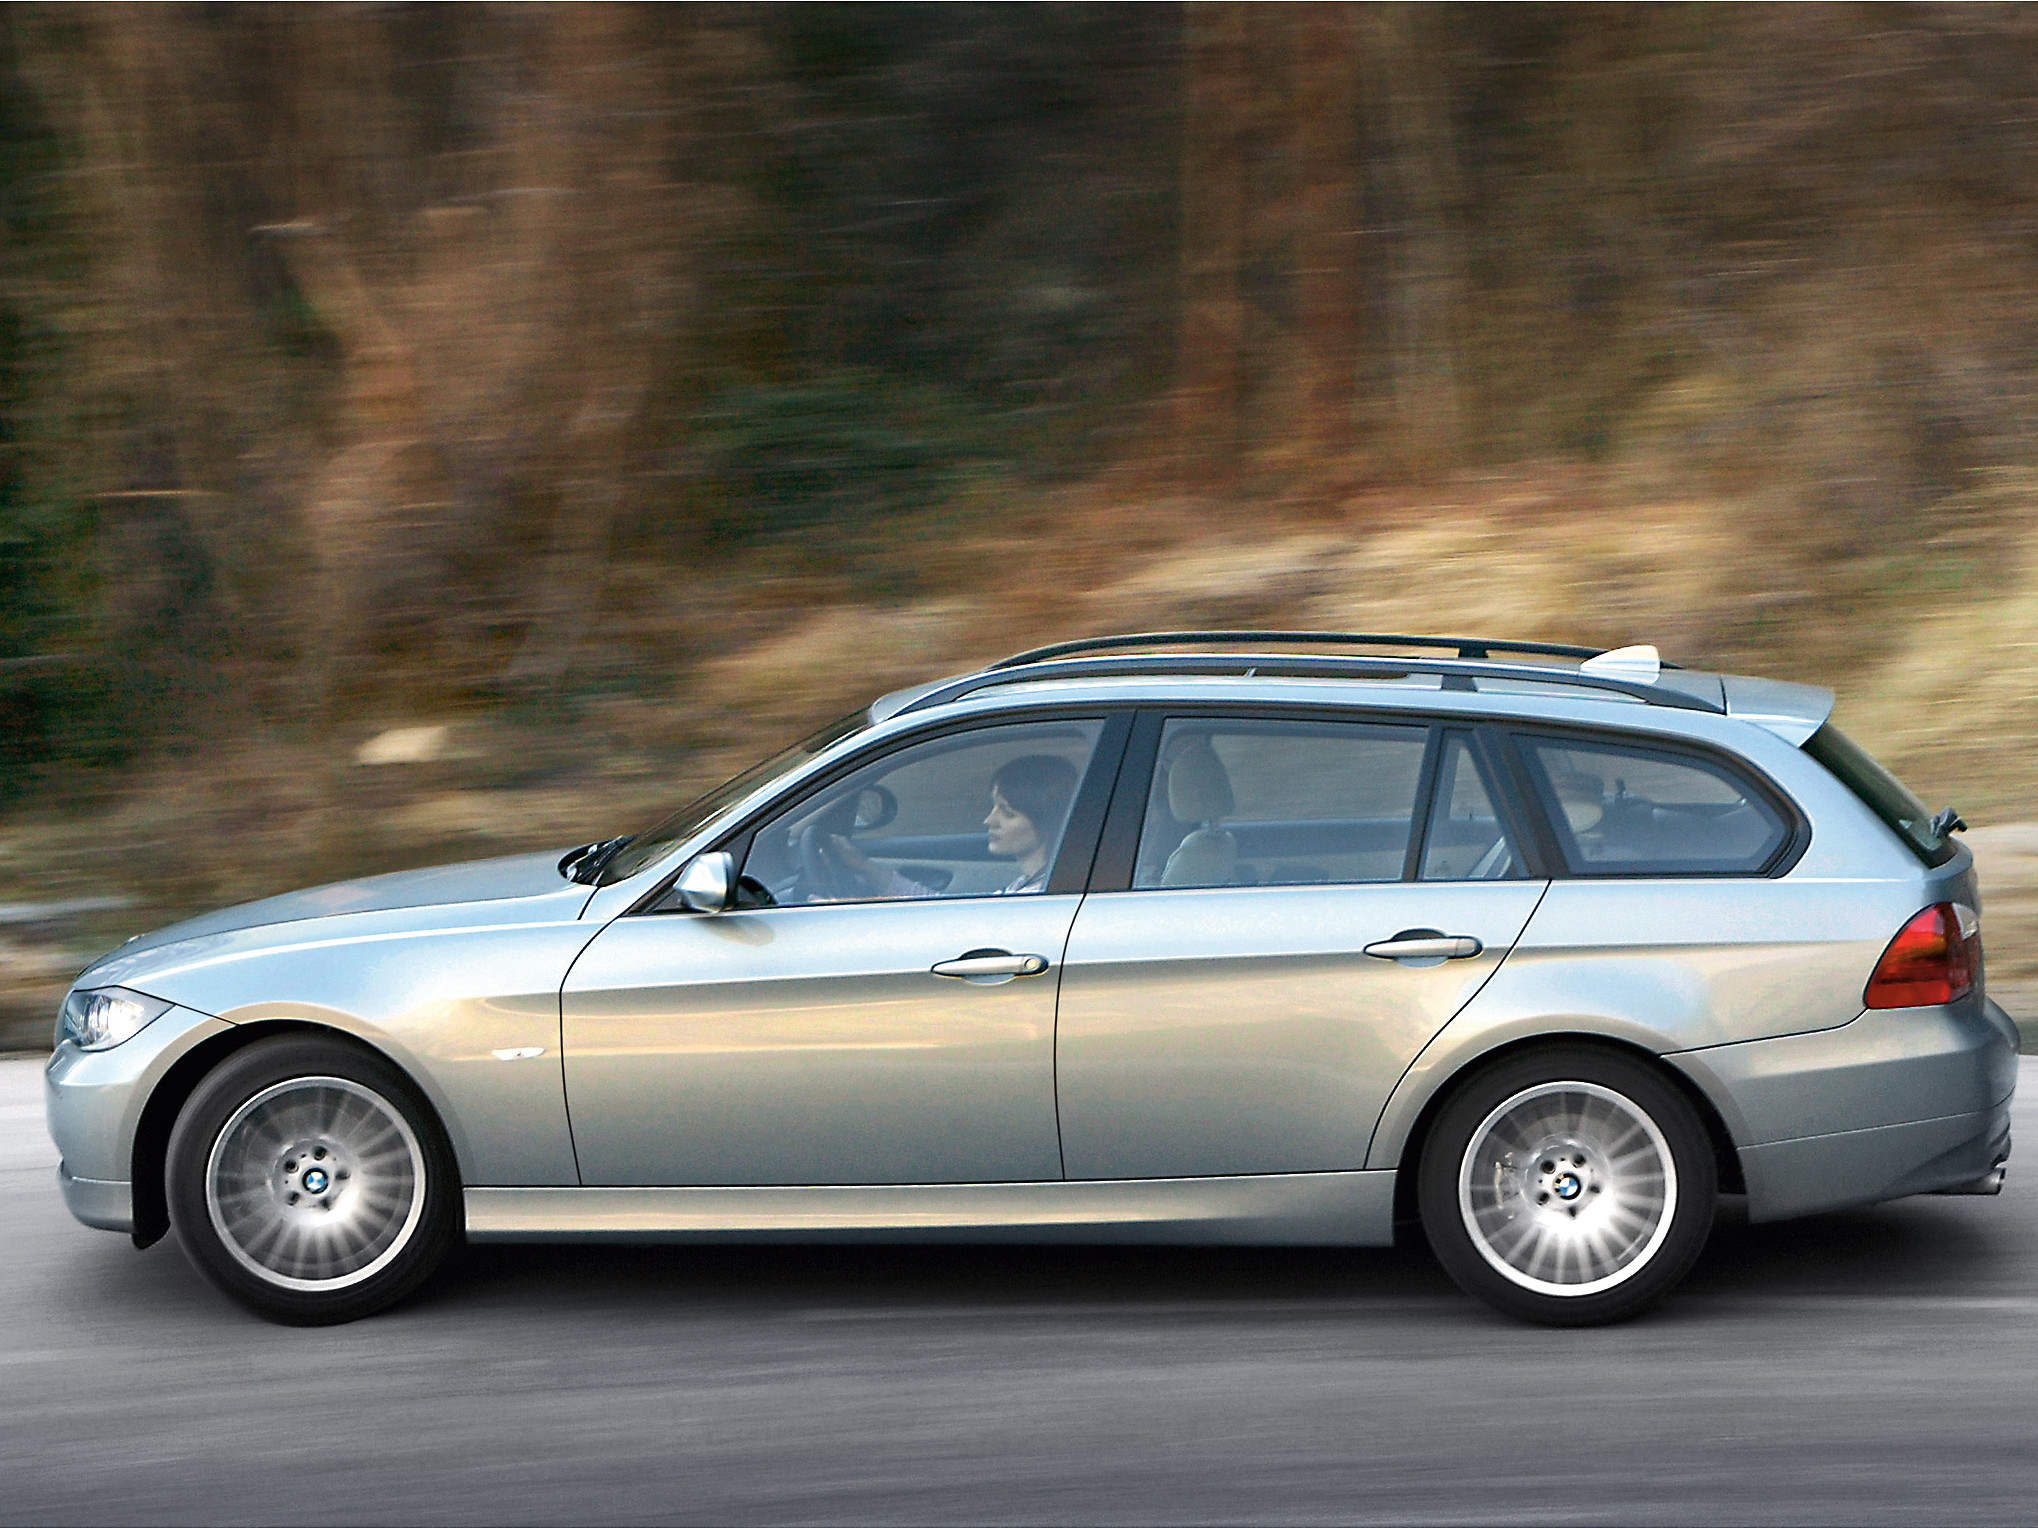 How to Buy a Used BMW E90 3 Series